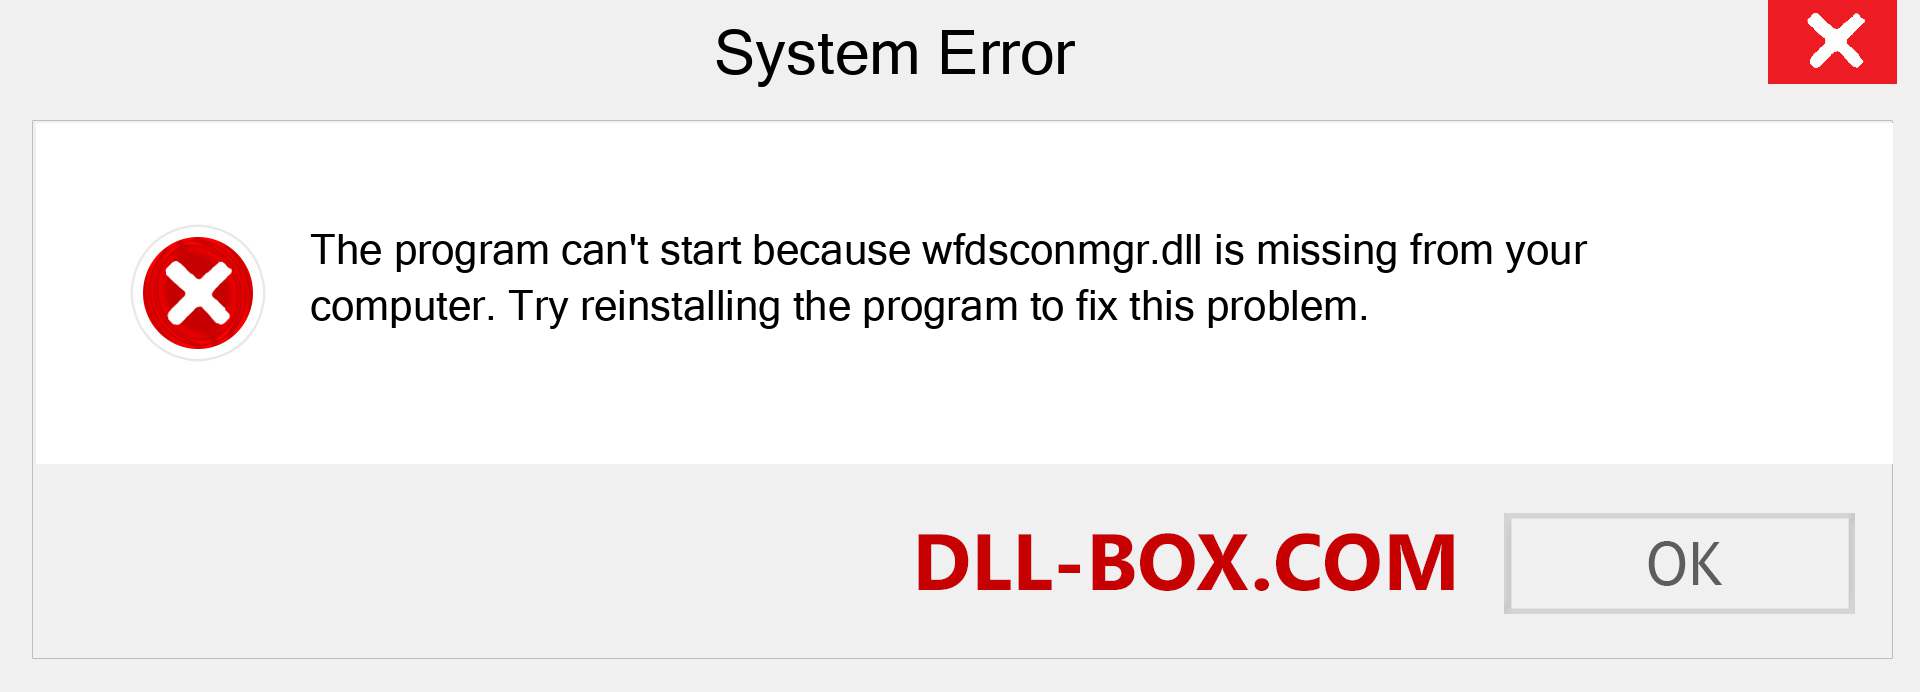  wfdsconmgr.dll file is missing?. Download for Windows 7, 8, 10 - Fix  wfdsconmgr dll Missing Error on Windows, photos, images